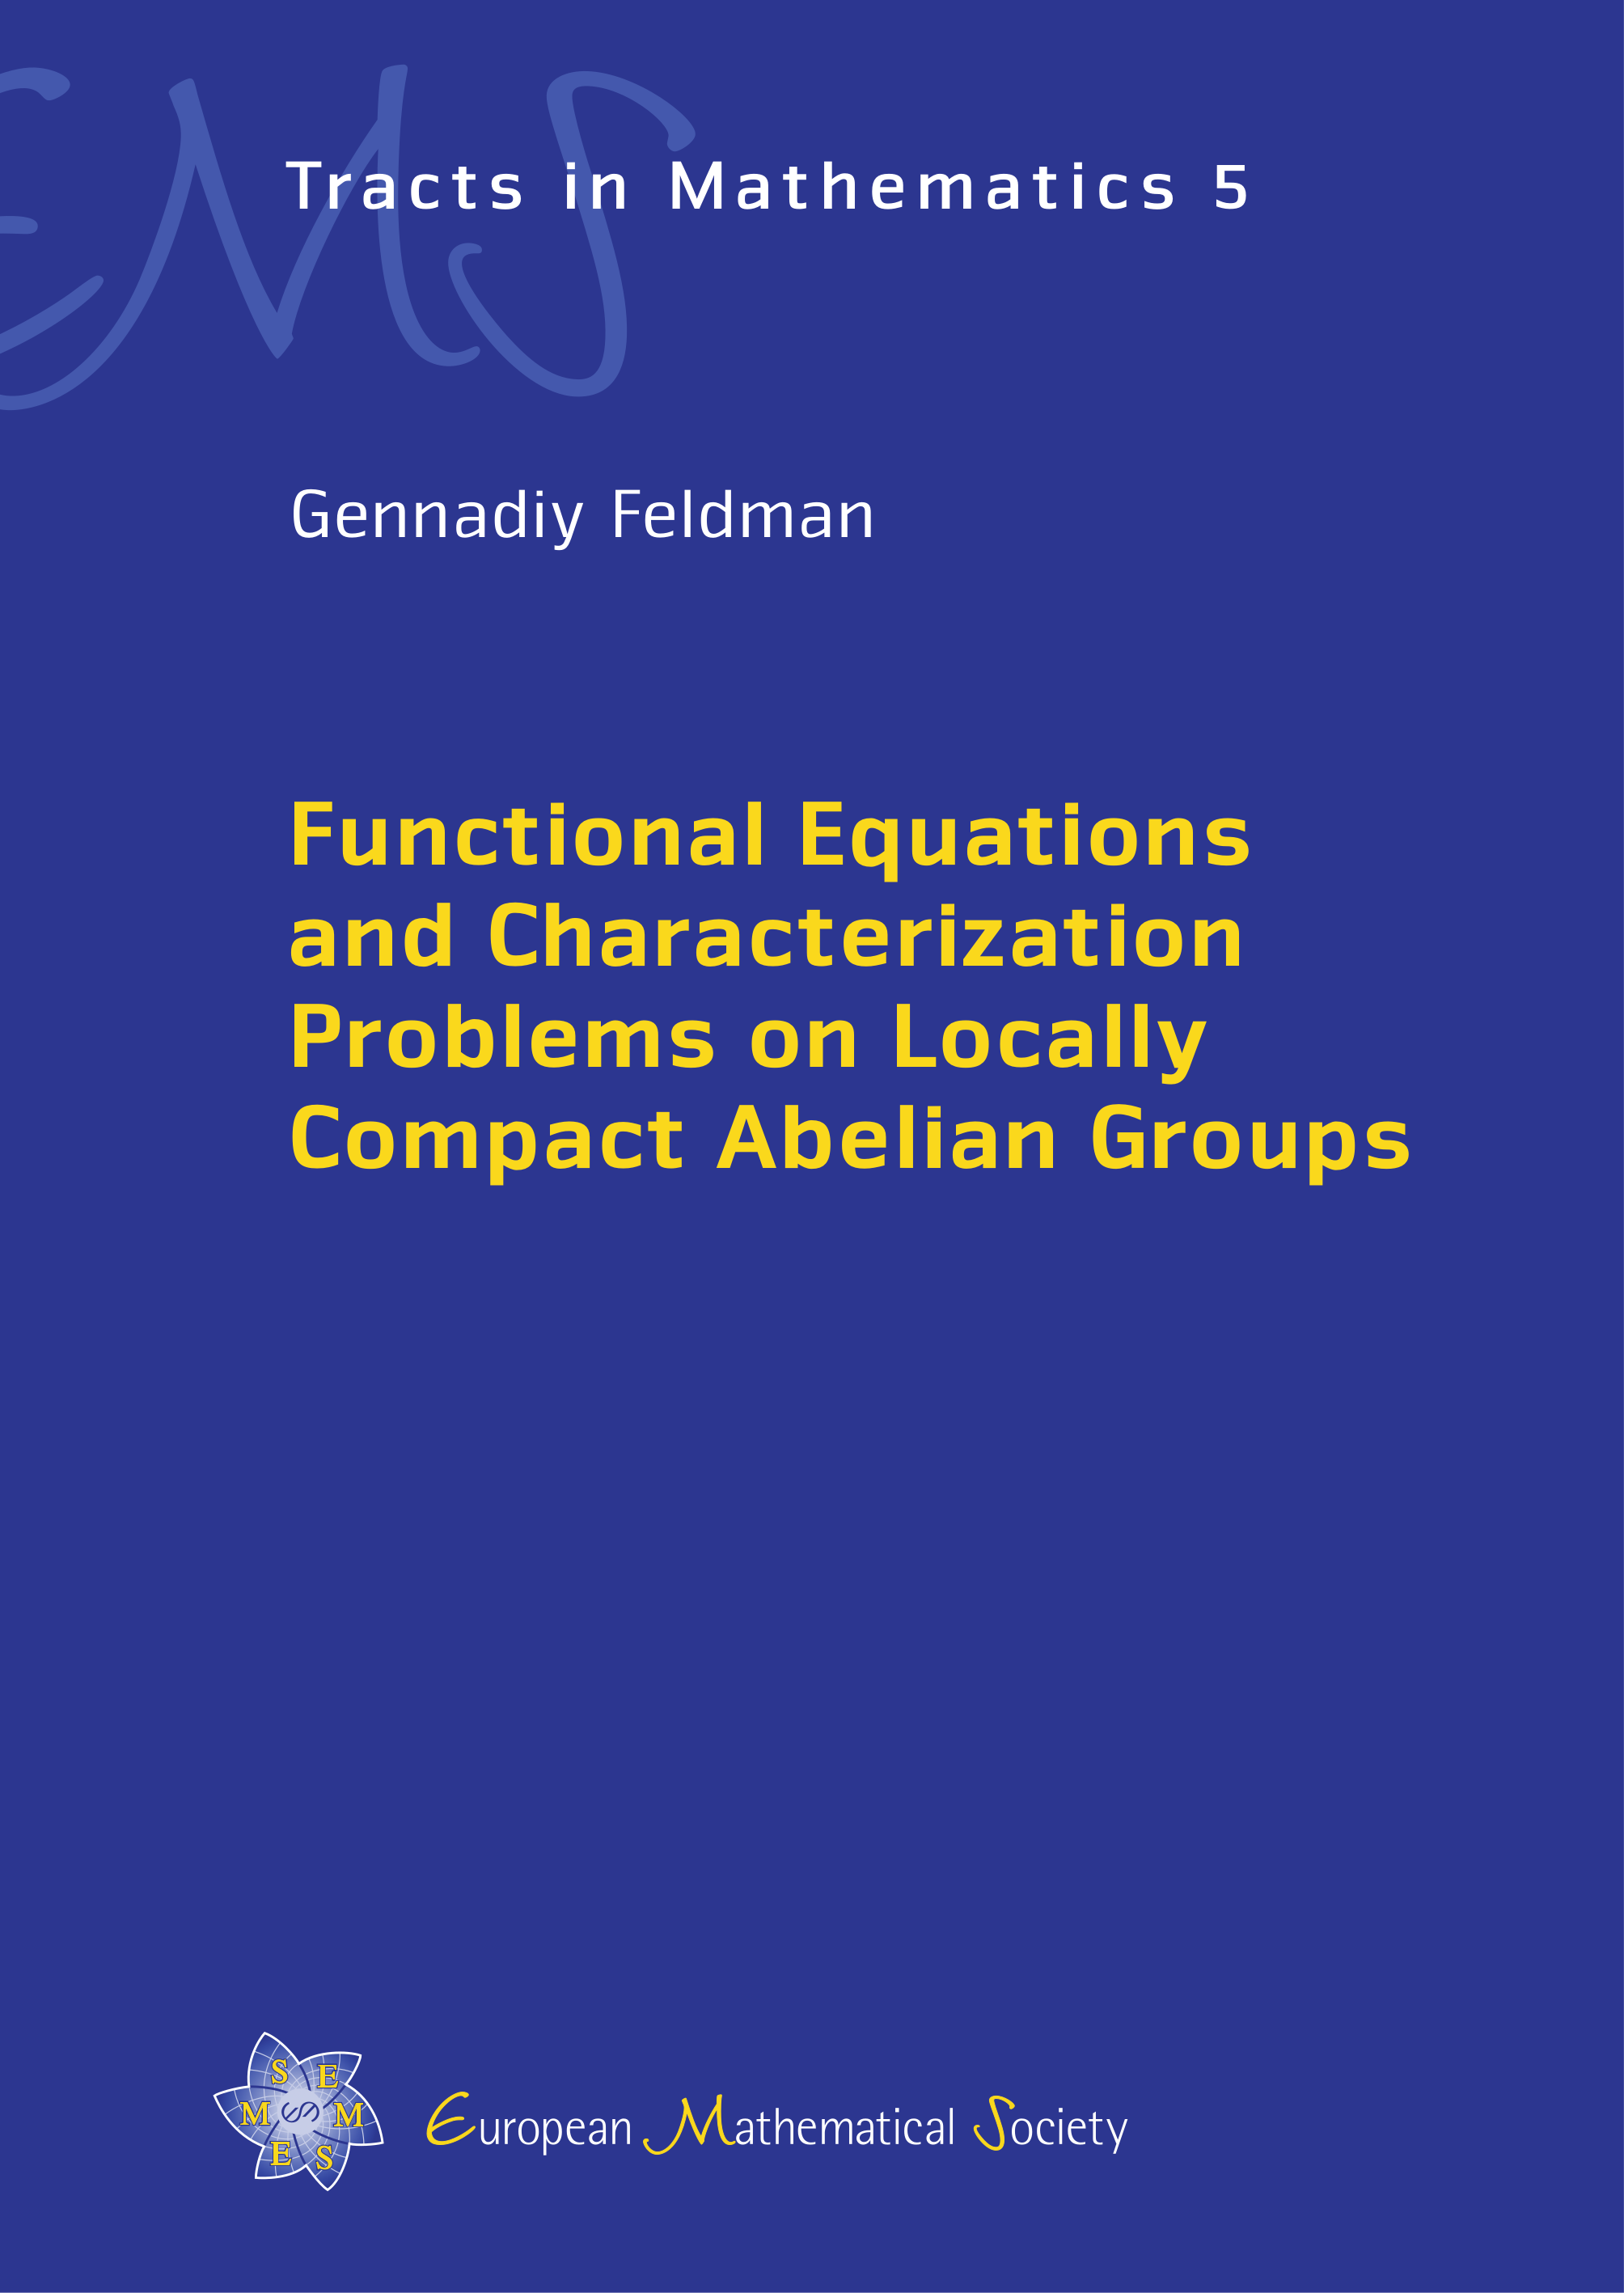 Locally compact Abelian groups for which the Skitovich–Darmois theorem holds cover